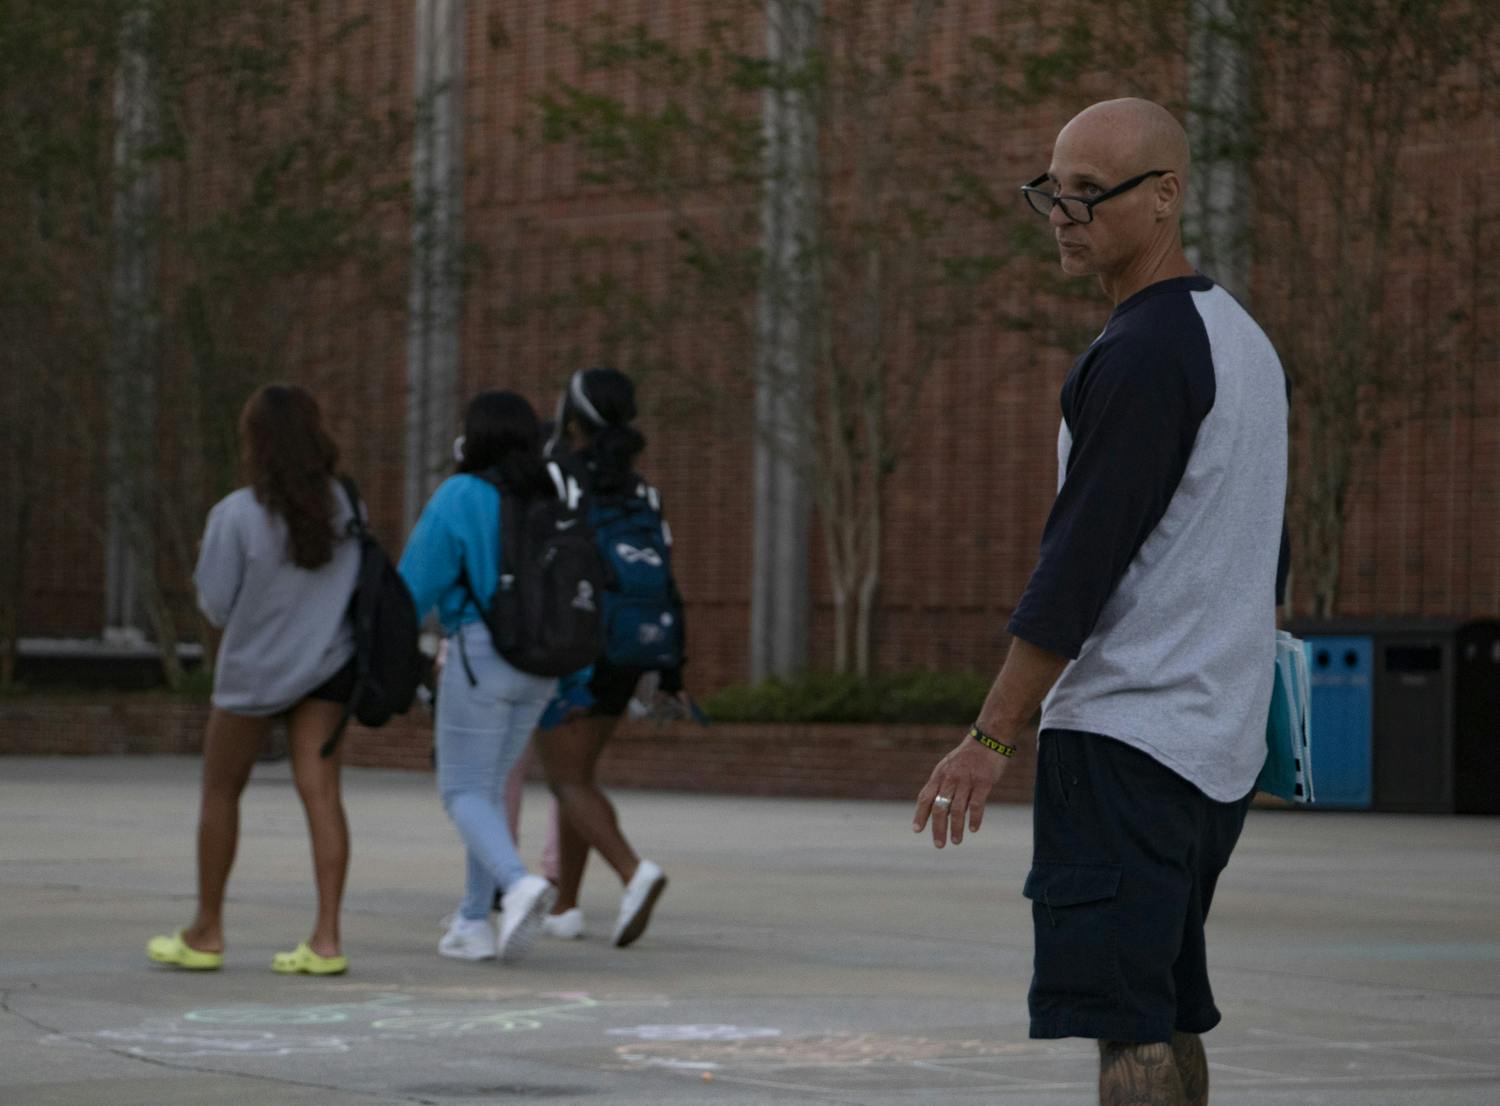 A petitioner looks for people to sign the blue petition outside the Reitz Union on Thursday, Oct. 28, 2021. "This is a good cause," he said. "The Seminoles are getting jerked around by the government." He warned that the green petition is not a good one.